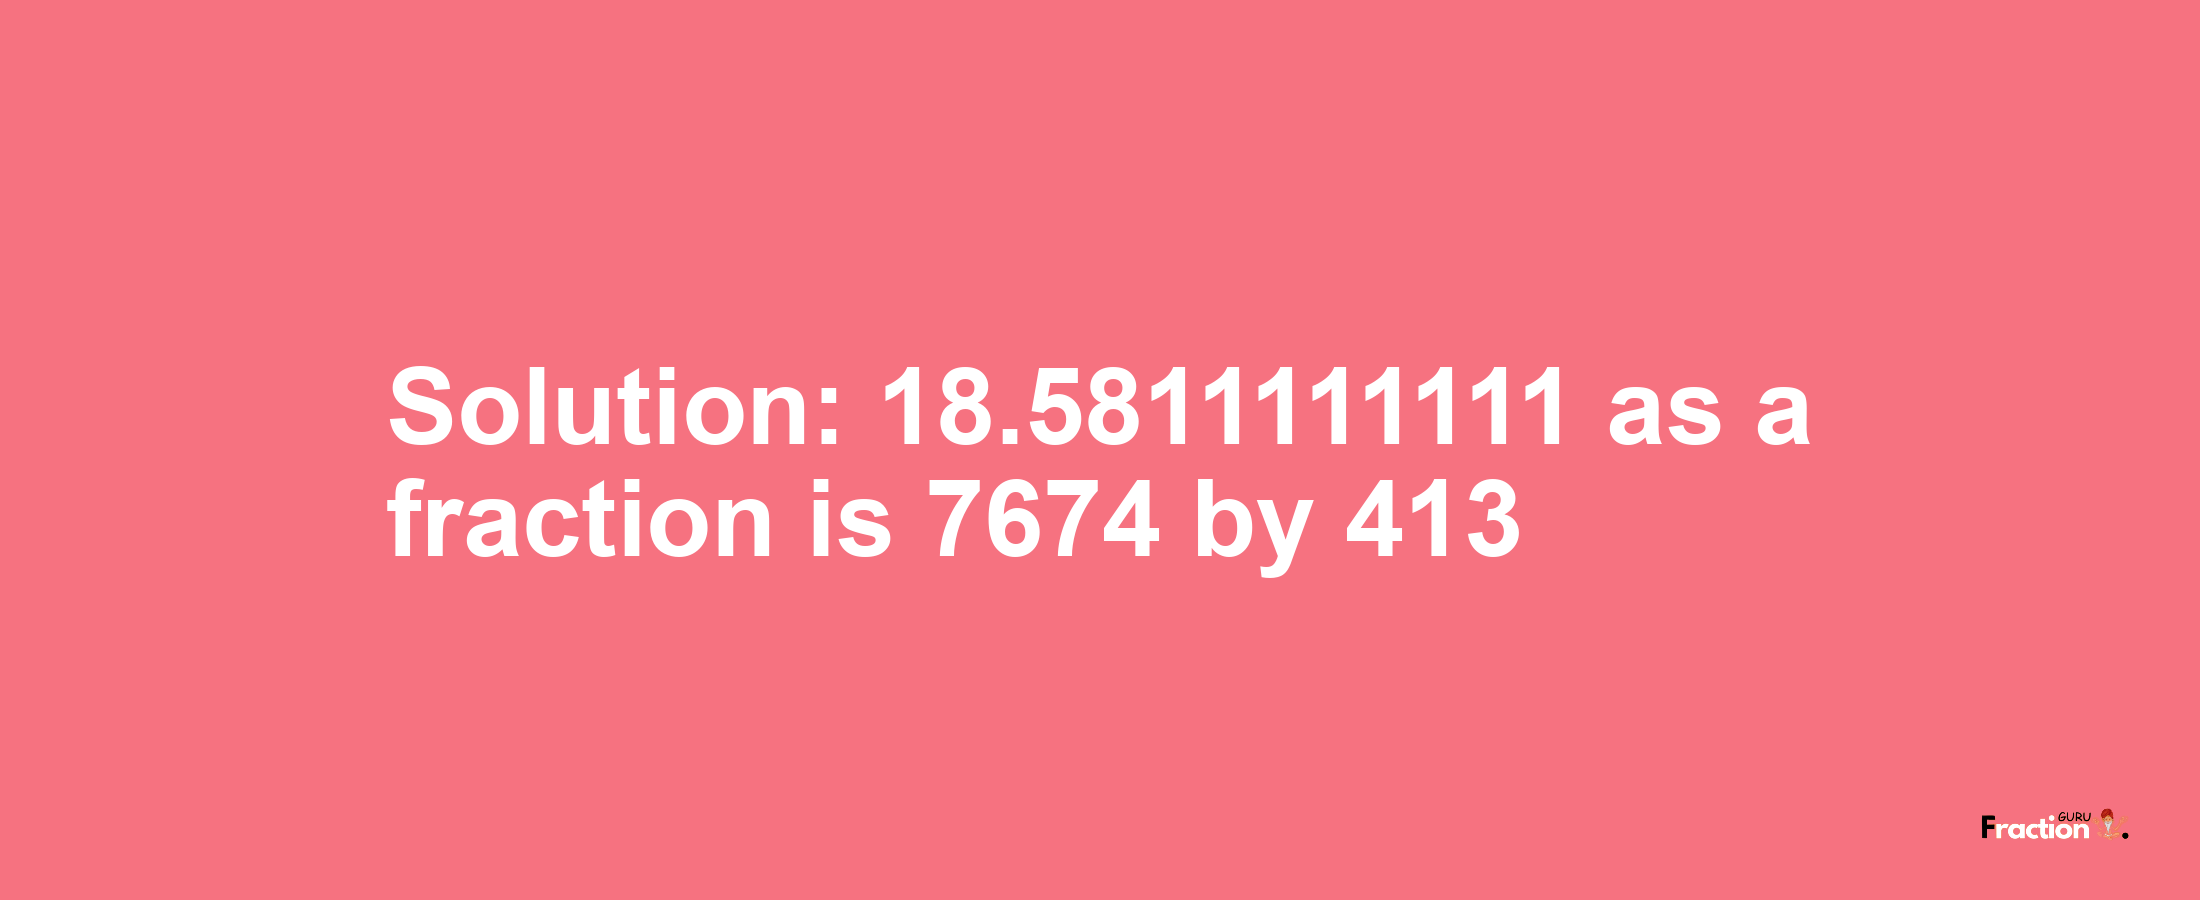 Solution:18.5811111111 as a fraction is 7674/413